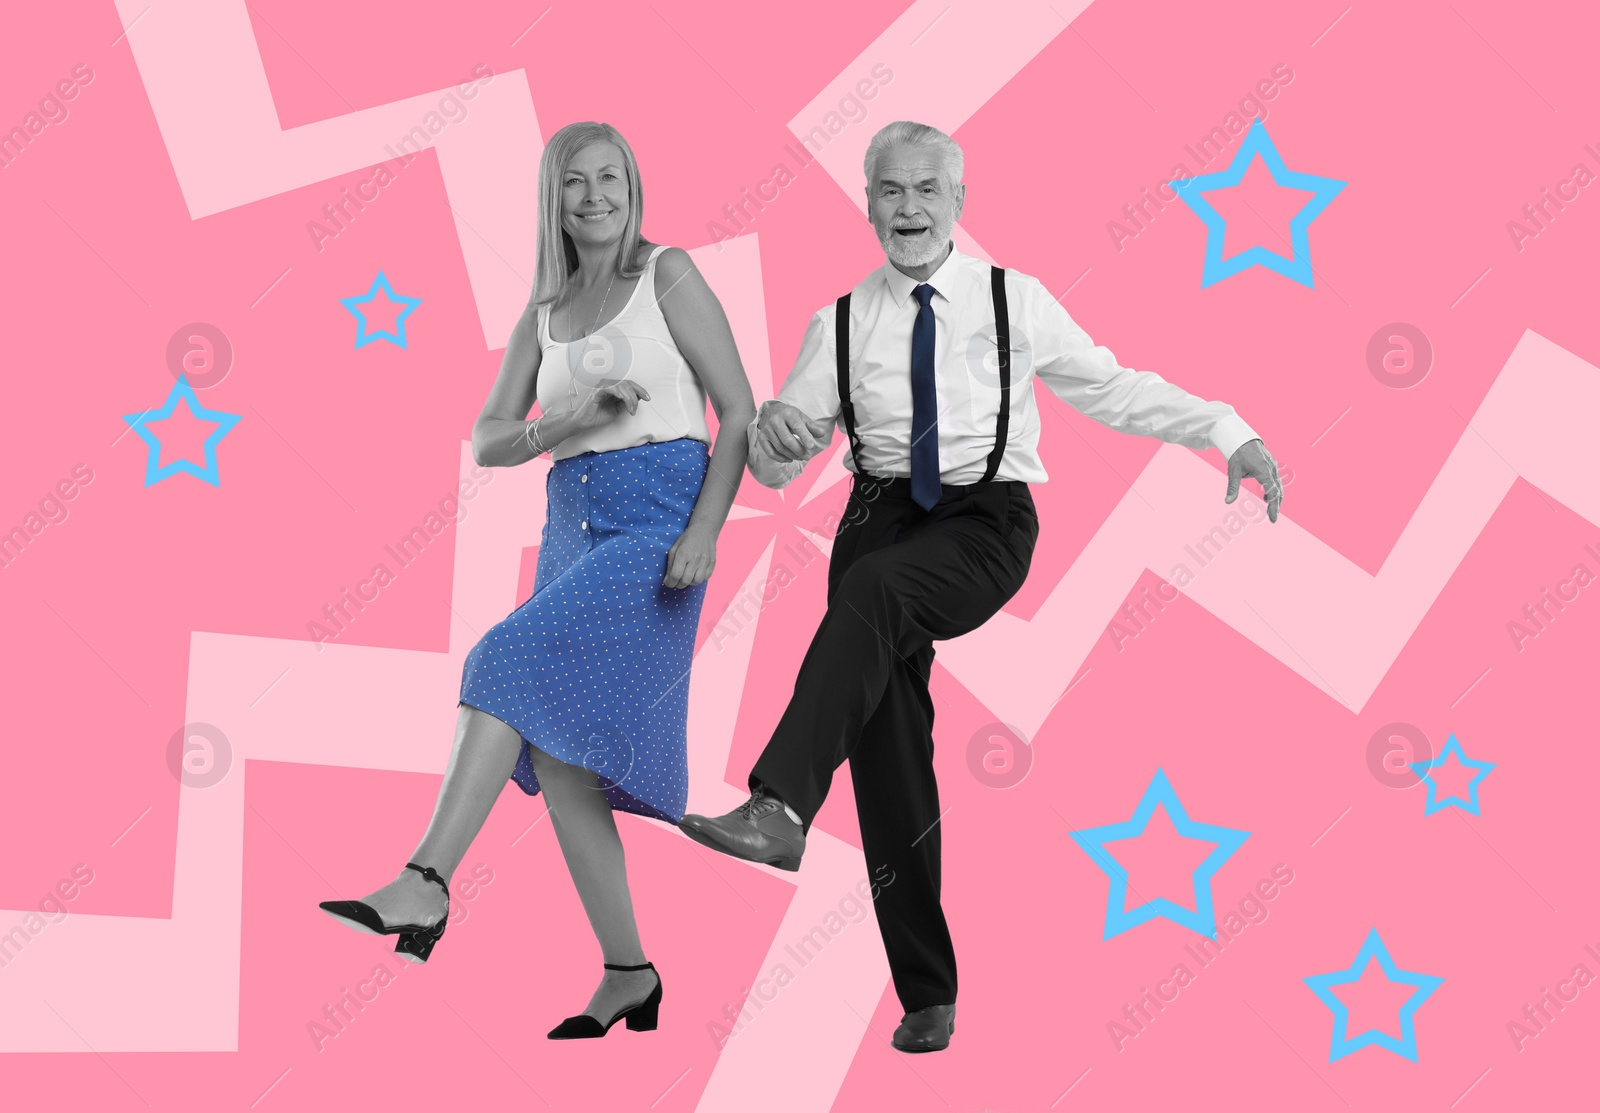 Image of Happy couple dancing on bright background. Creative collage with stylish mature man and woman. Concept of music, energy, party, fashion, lifestyle